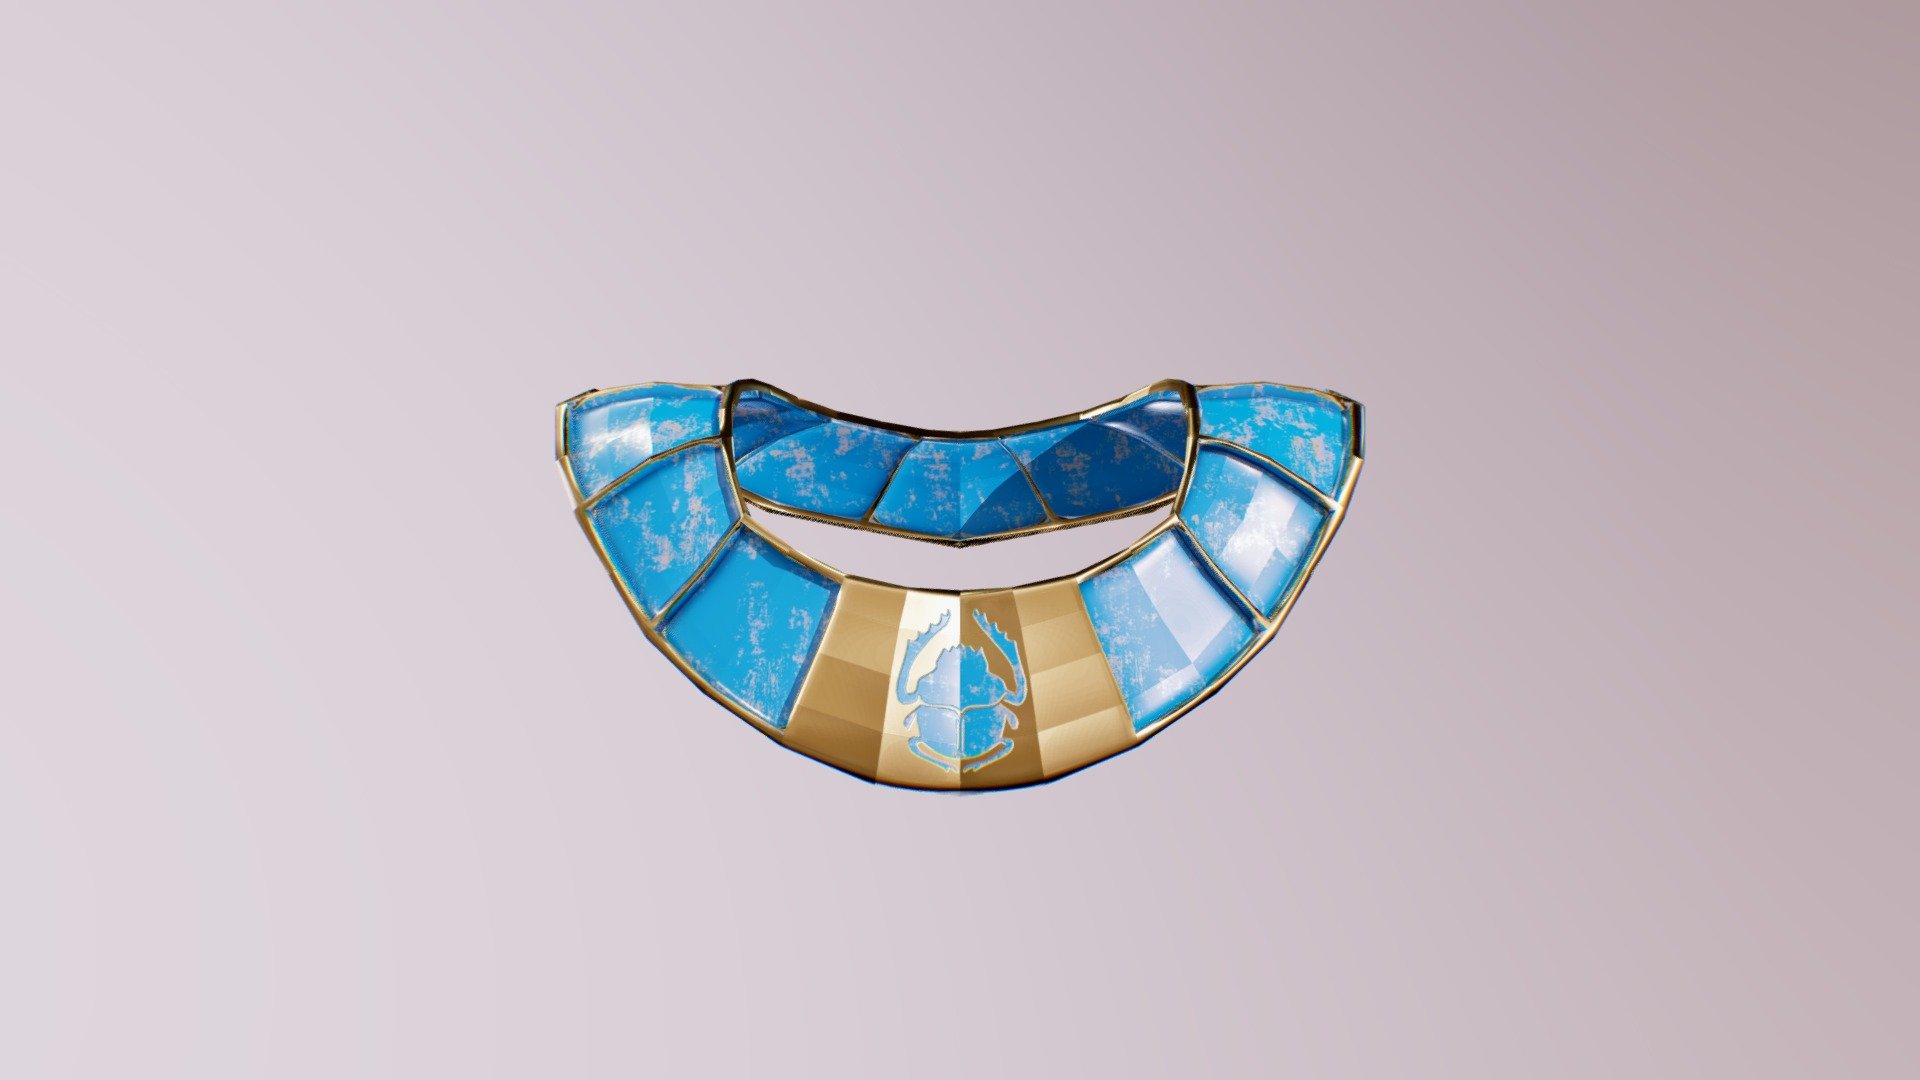 This is a neckguard for an egyptian guard that will be in a video game. It's a piece from a set 3d model